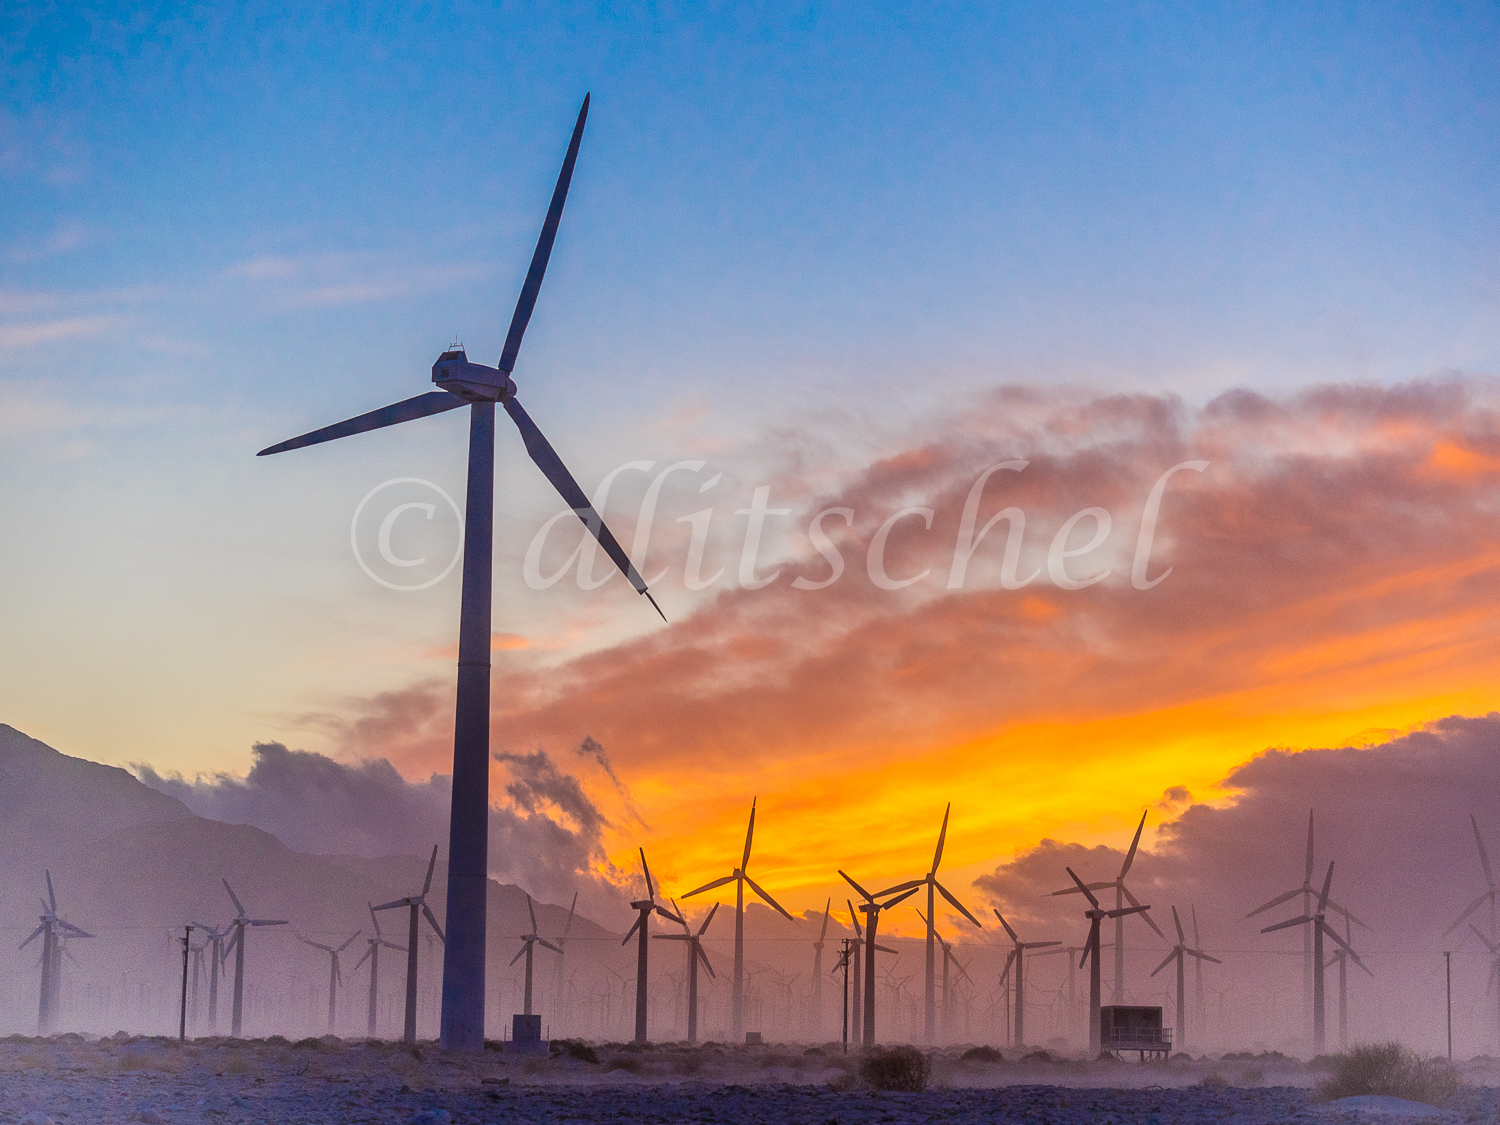 A wind farm outside of Palm Springs, California during a colorful sunset. A wind turbine is a device that converts kinetic energy from the wind into electrical power. The term appears to have migrated from parallel hydroelectric technology (rotary propeller). The technical description for this type of machine is an aerofoil-powered generator.The result of over a millennium of windmill development and modern engineering, today's wind turbines are manufactured in a wide range of vertical and horizontal axis types. The smallest turbines are used for applications such as battery charging for auxiliary power for boats or caravans or to power traffic warning signs. Slightly larger turbines can be used for making contributions to a domestic power supply while selling unused power back to the utility supplier via the electrical grid. Arrays of large turbines, known as wind farms, are becoming an increasingly important source of renewable energy and are used by many countries as part of a strategy to reduce their reliance on fossil fuels.